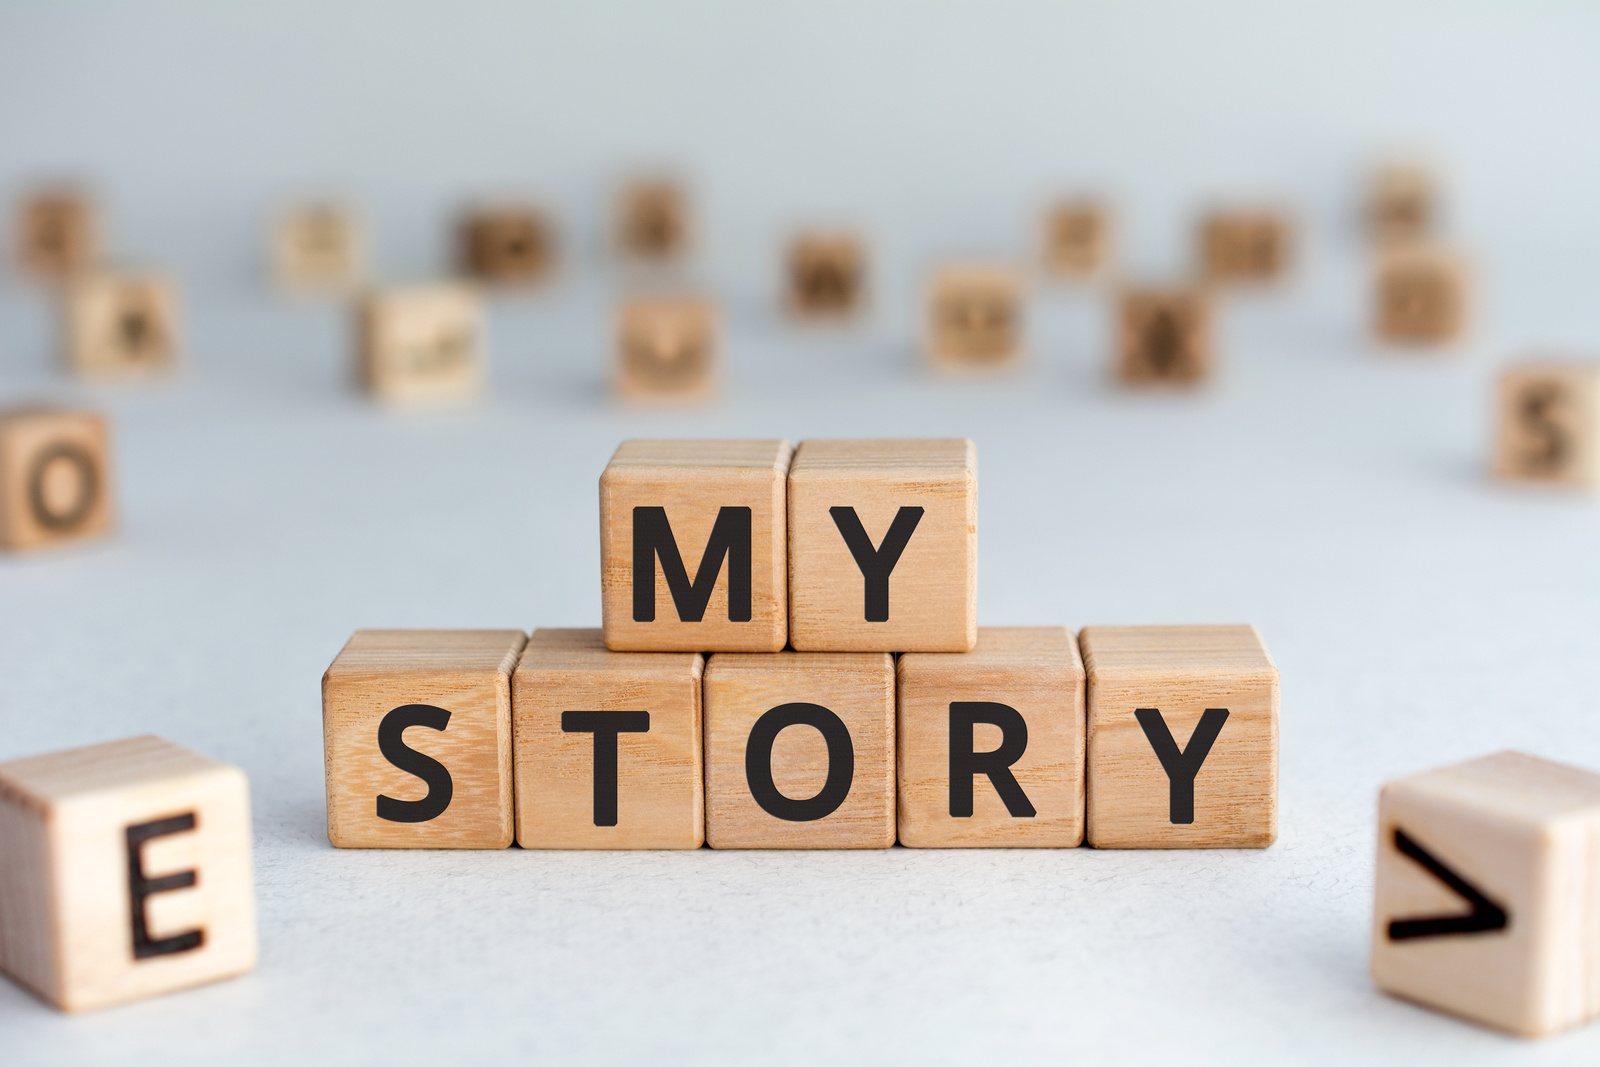 my story - words from wooden blocks with letters